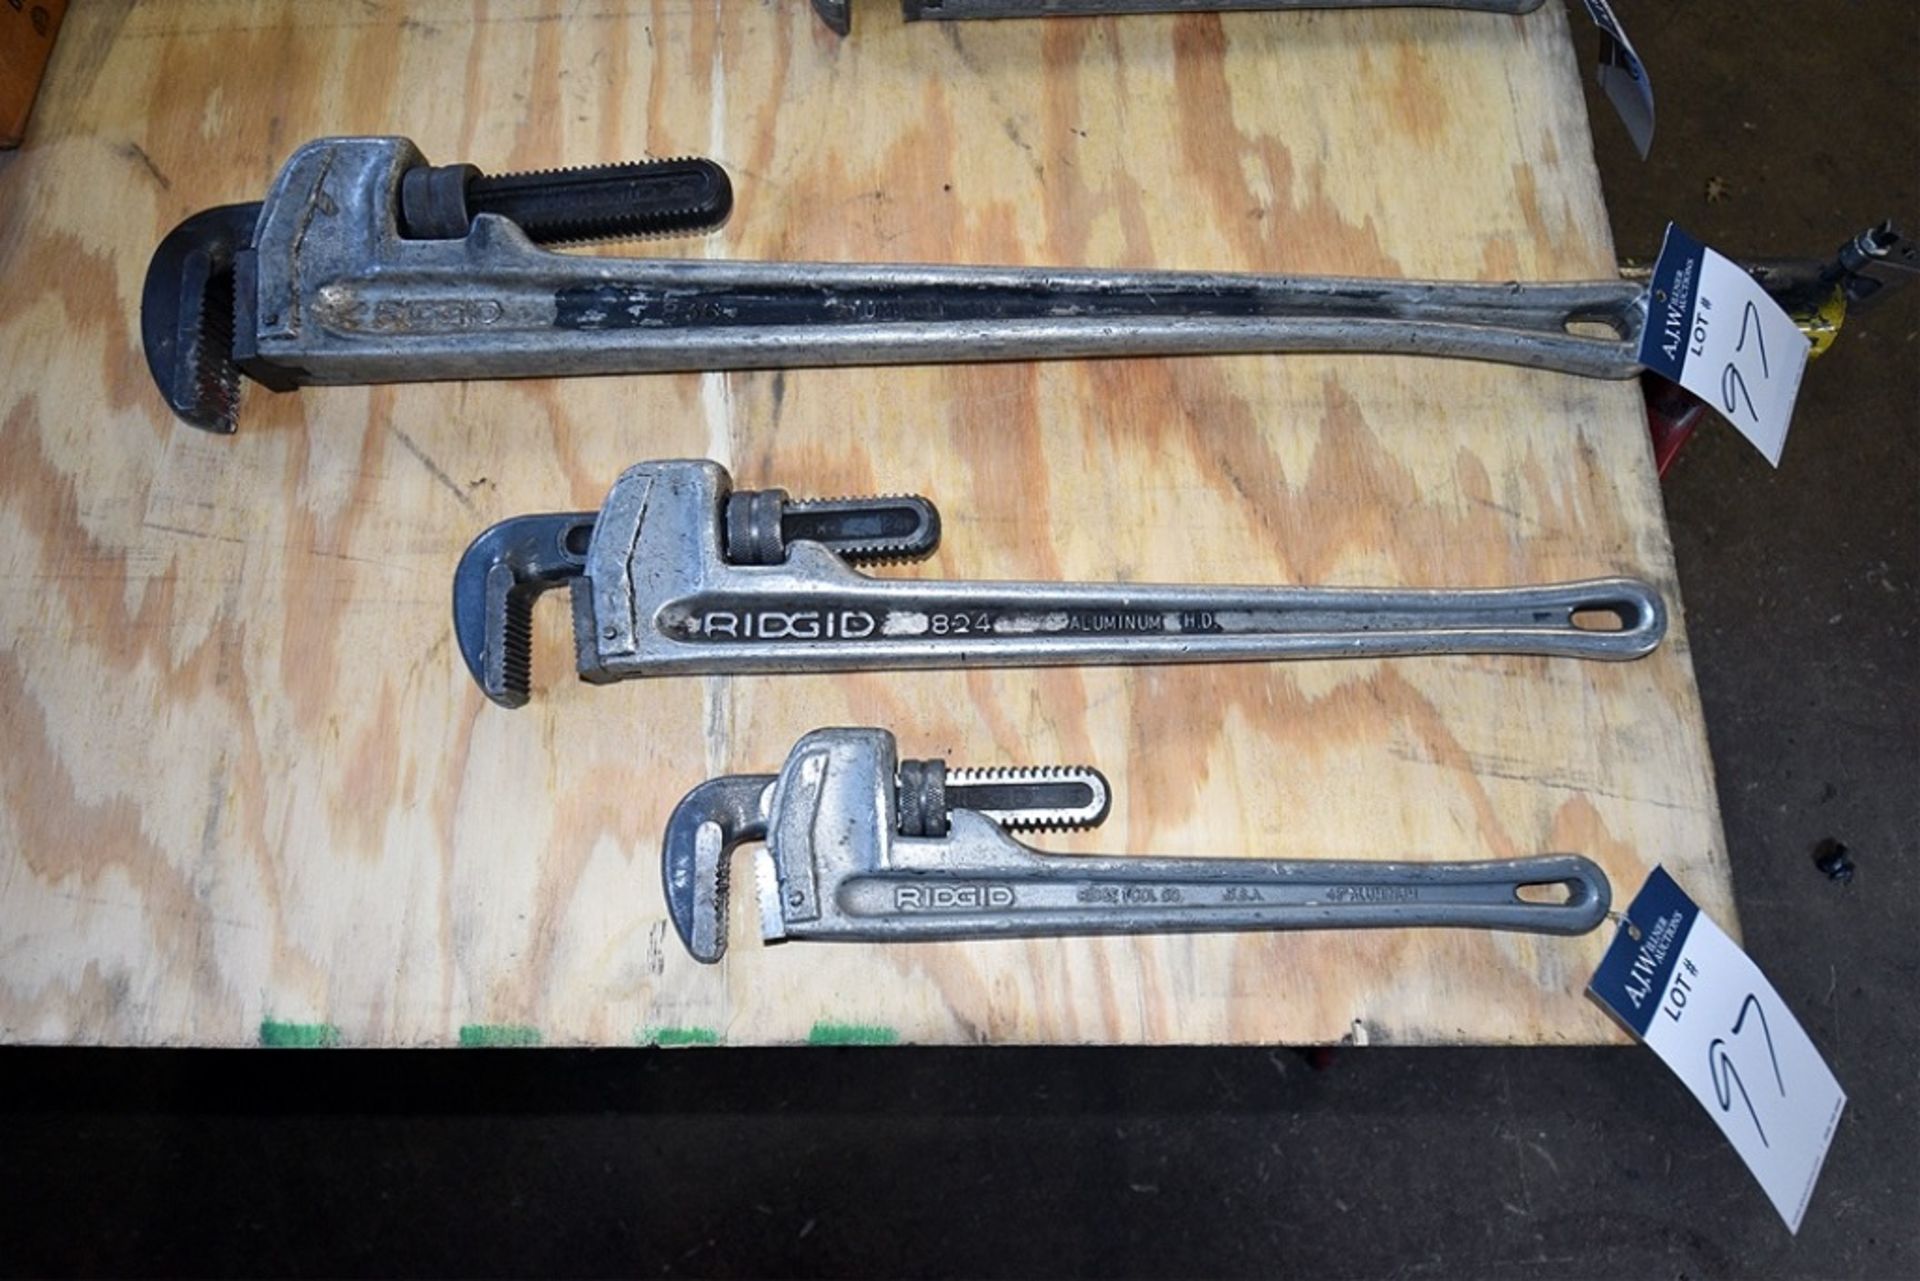 Ridgid Aluminum Pipe Wrench Set Consisting of: (1) 36", (1) 24", and (1) 18"